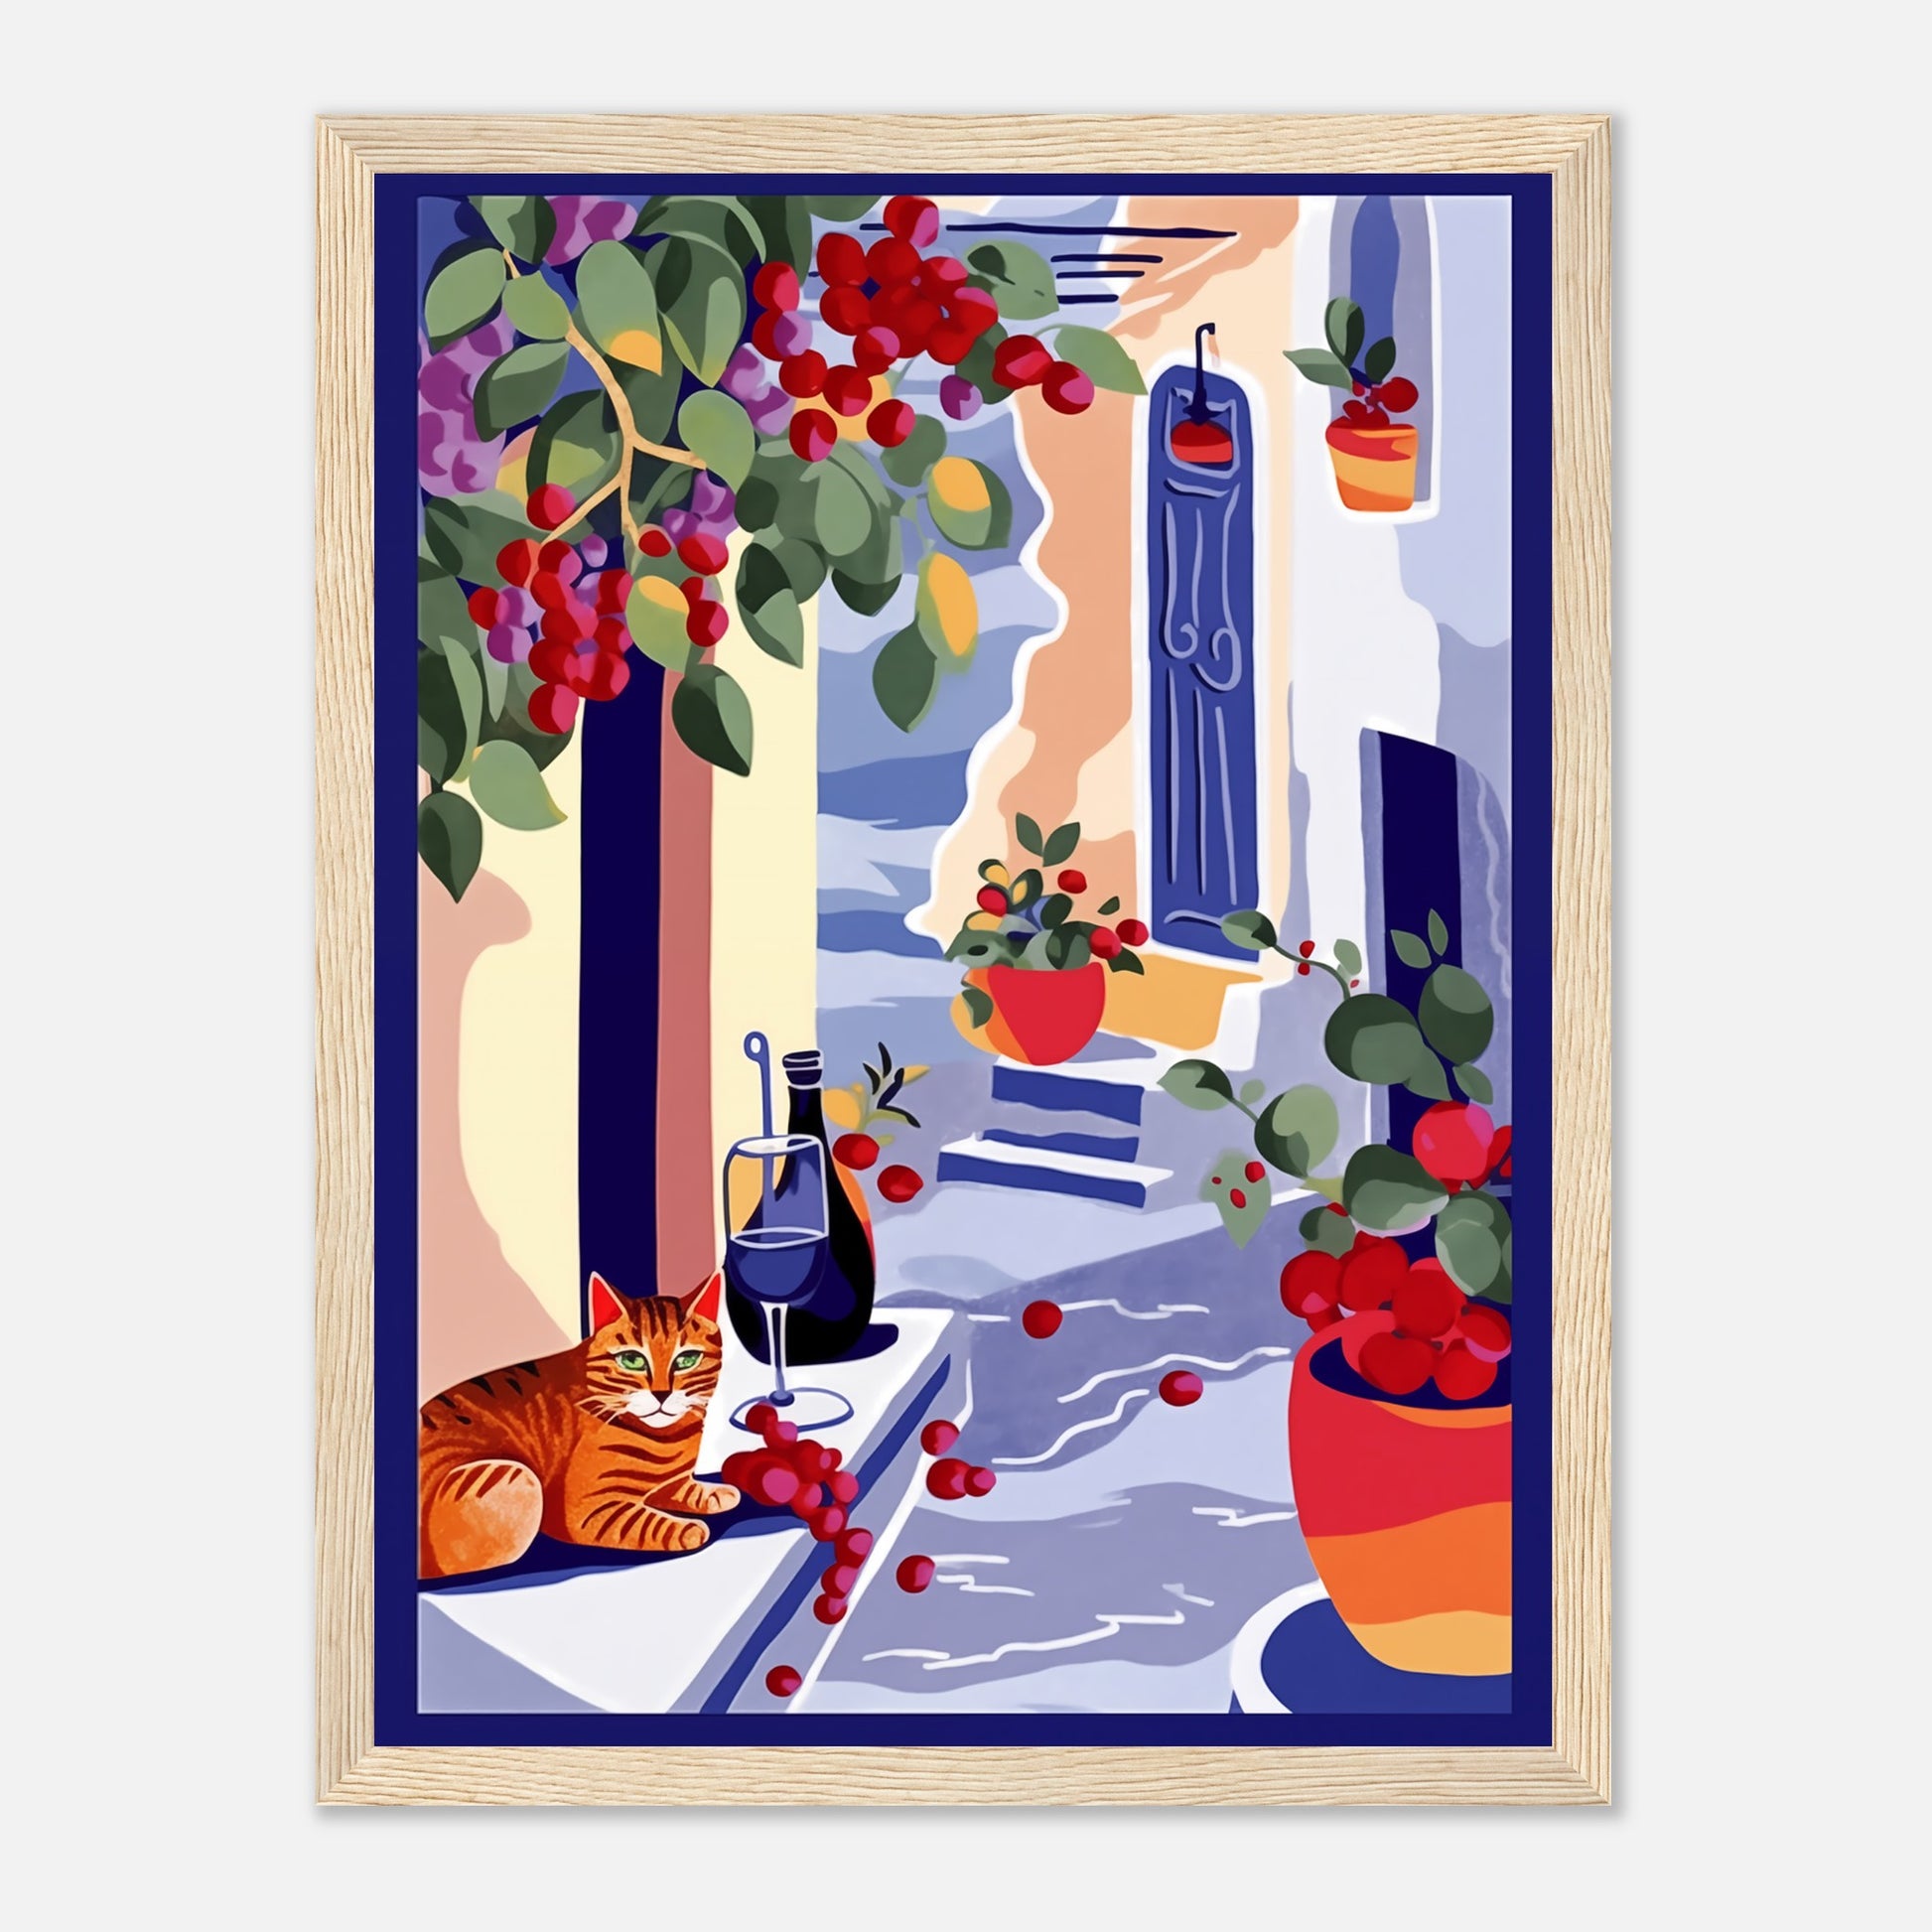 Illustration of a cat sitting on a windowsill with plants and a glass of wine.